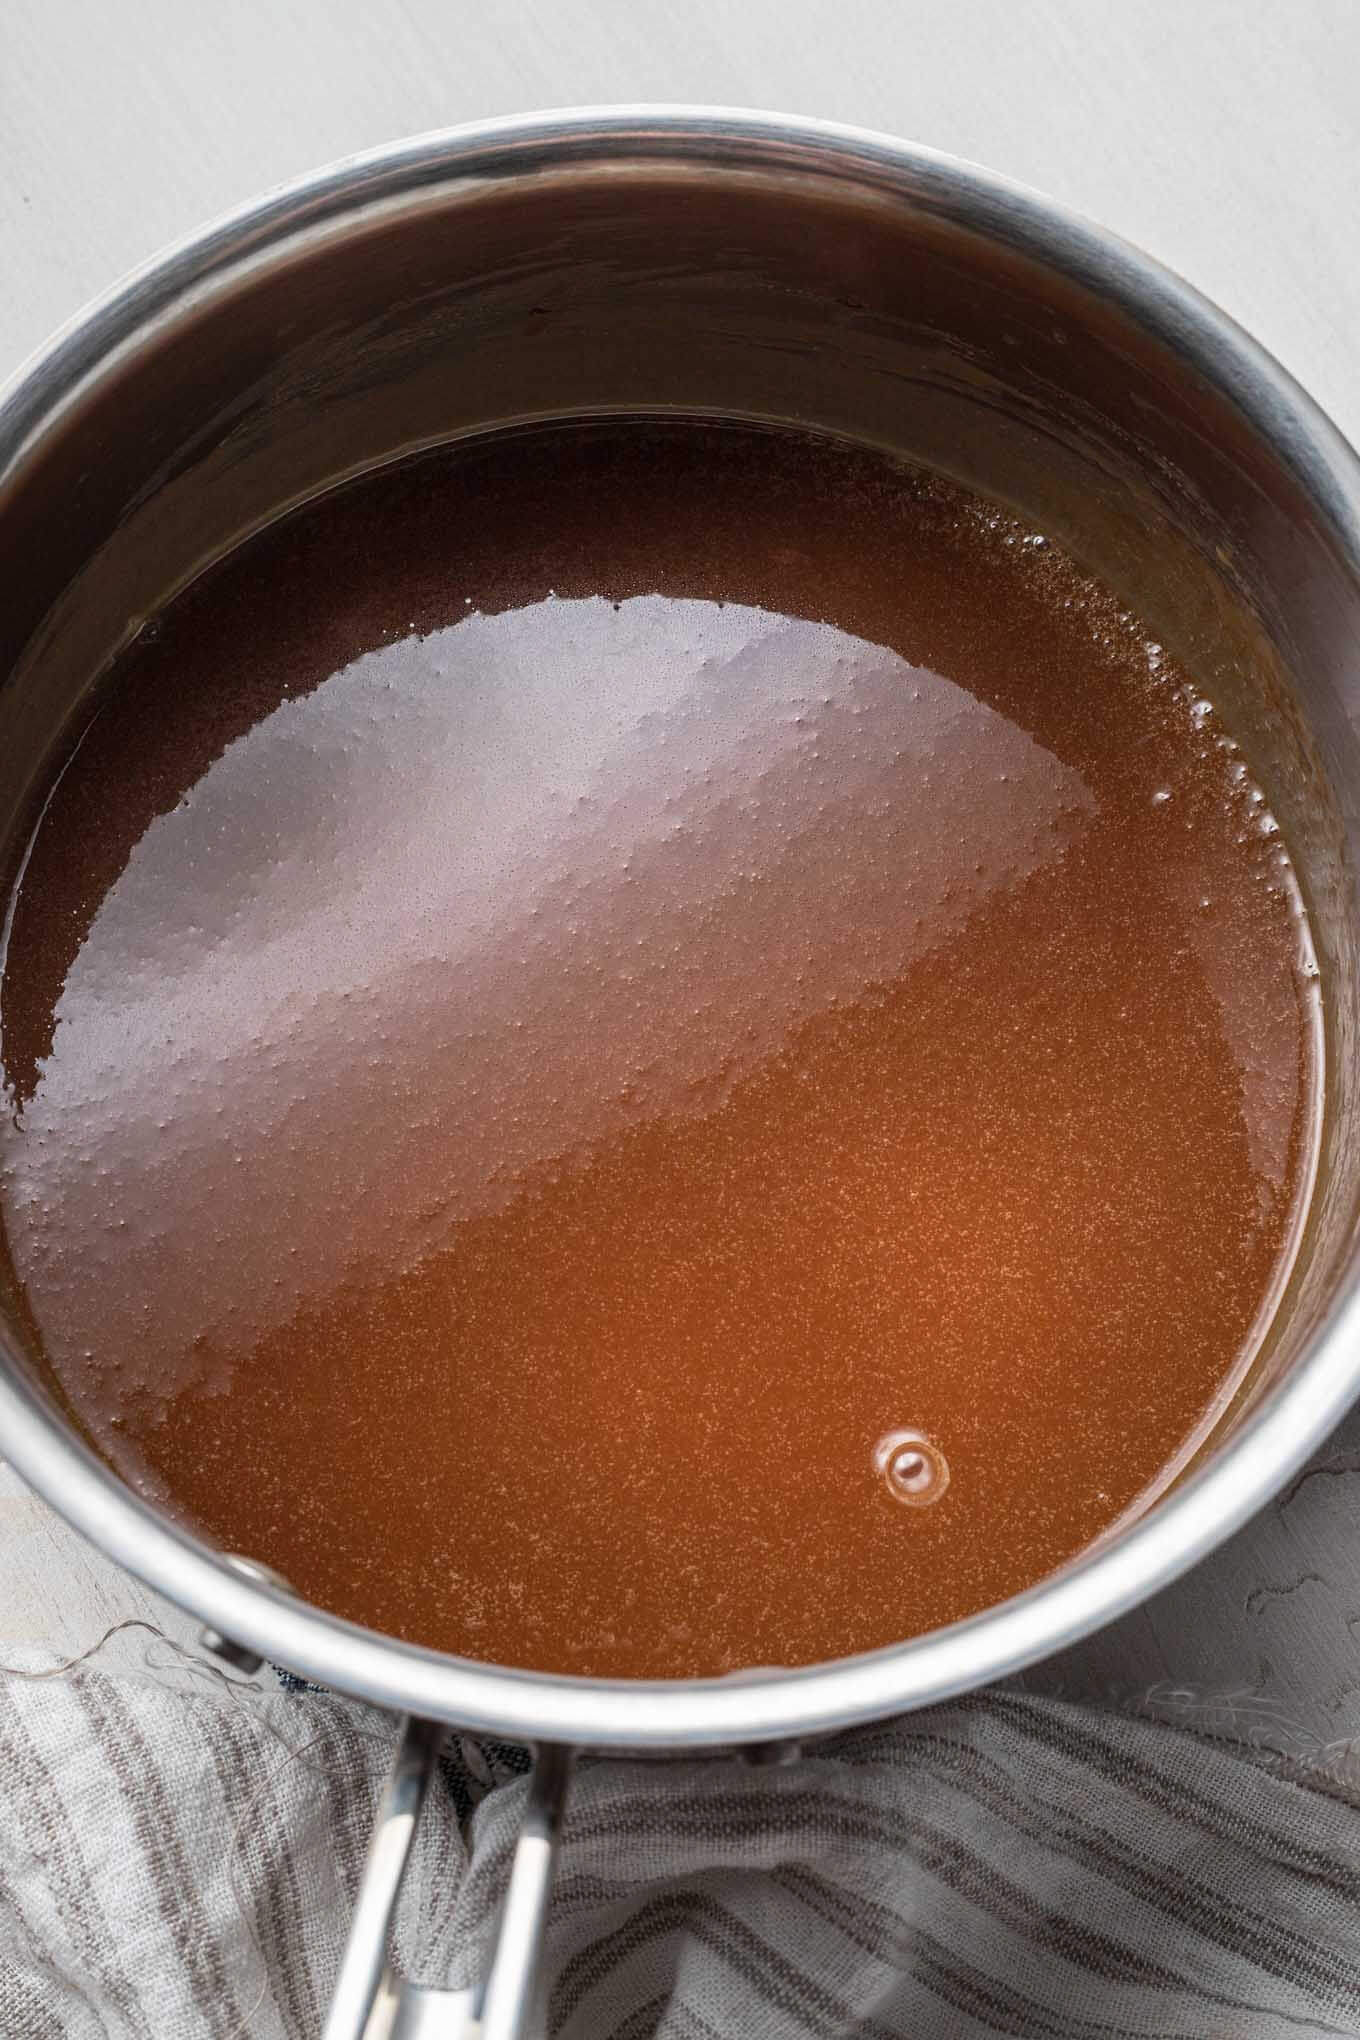 Amber colored sugar mixture in a saucepan, ready for making caramel sauce.